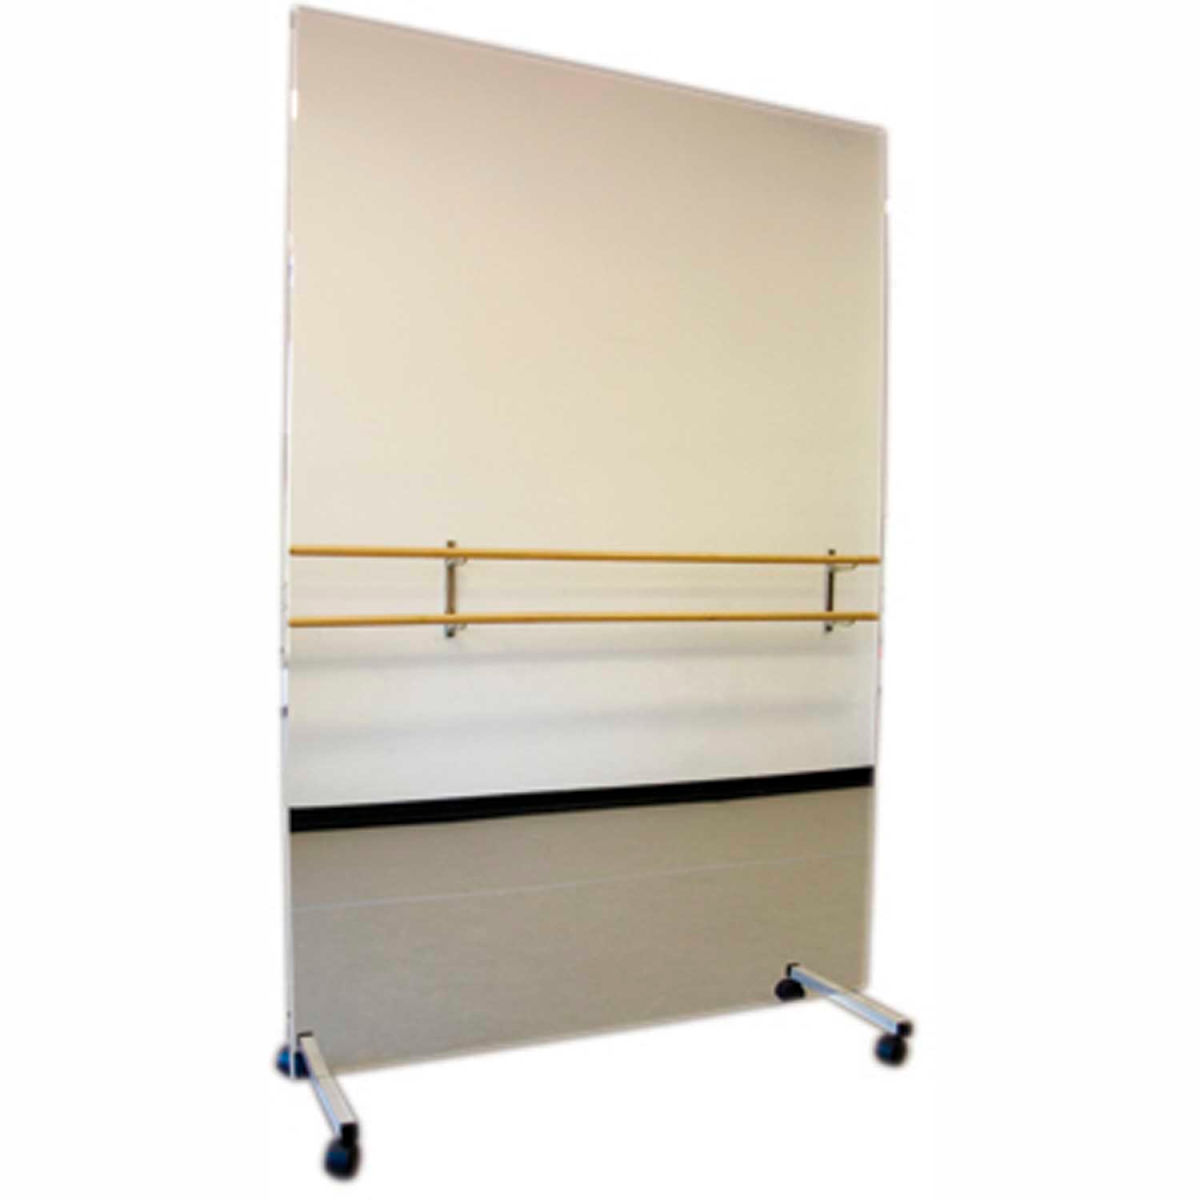 Picture of Fabrication Enterprises B2140350 Vertical Ultra-Safe Glassless Mirror with Mobile Caster Base - 48 x 72 in.